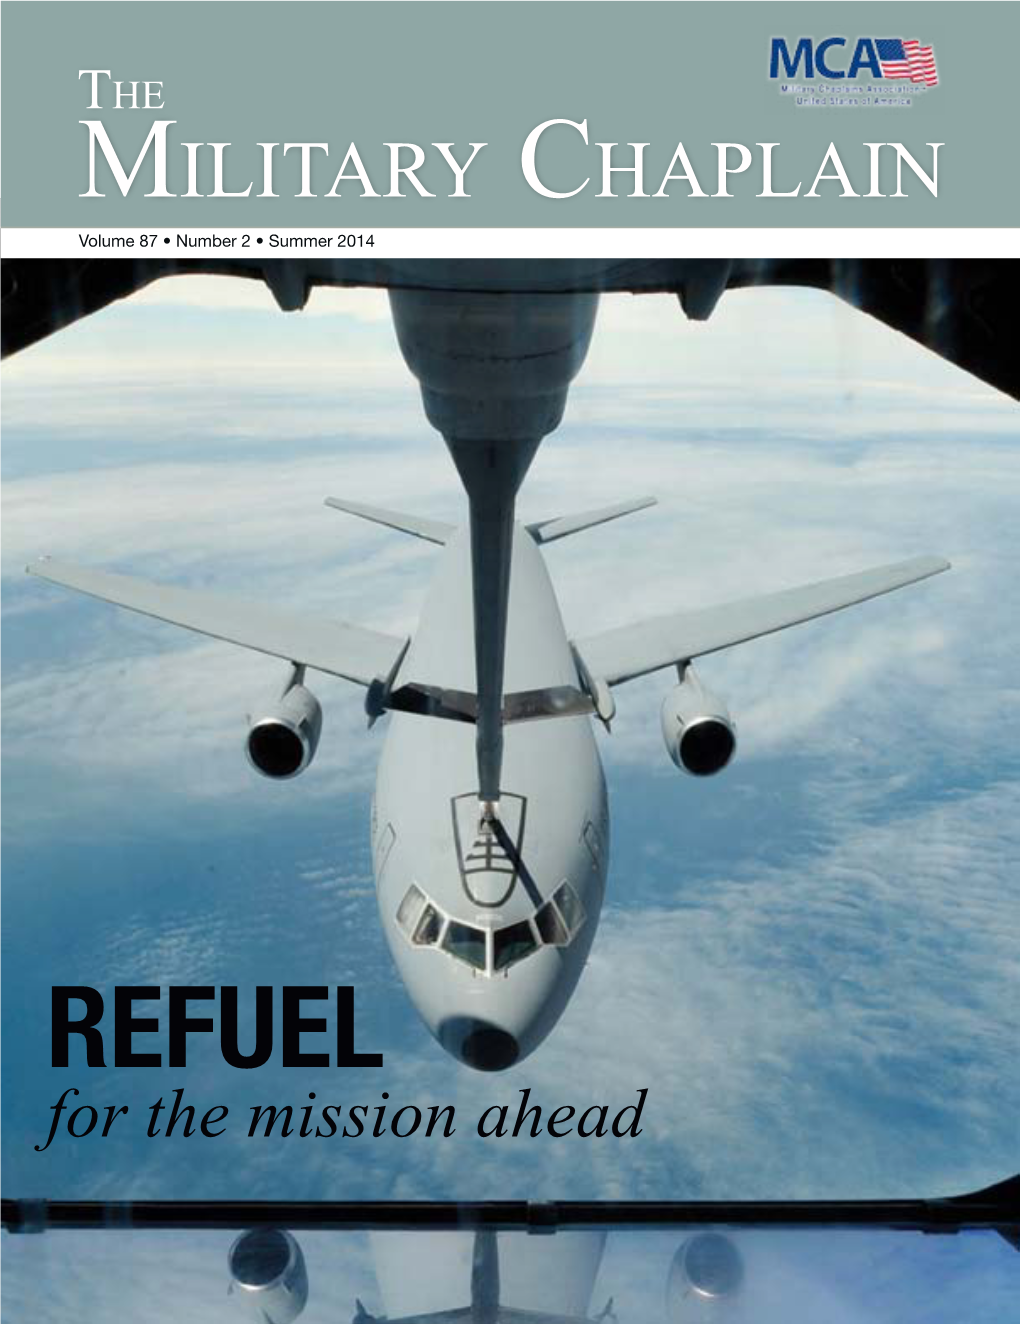 Refuel for the Mission Ahead the Cover: Volume 87 • Number 1 • Spring 2014 Refuel for the Mission Ahead